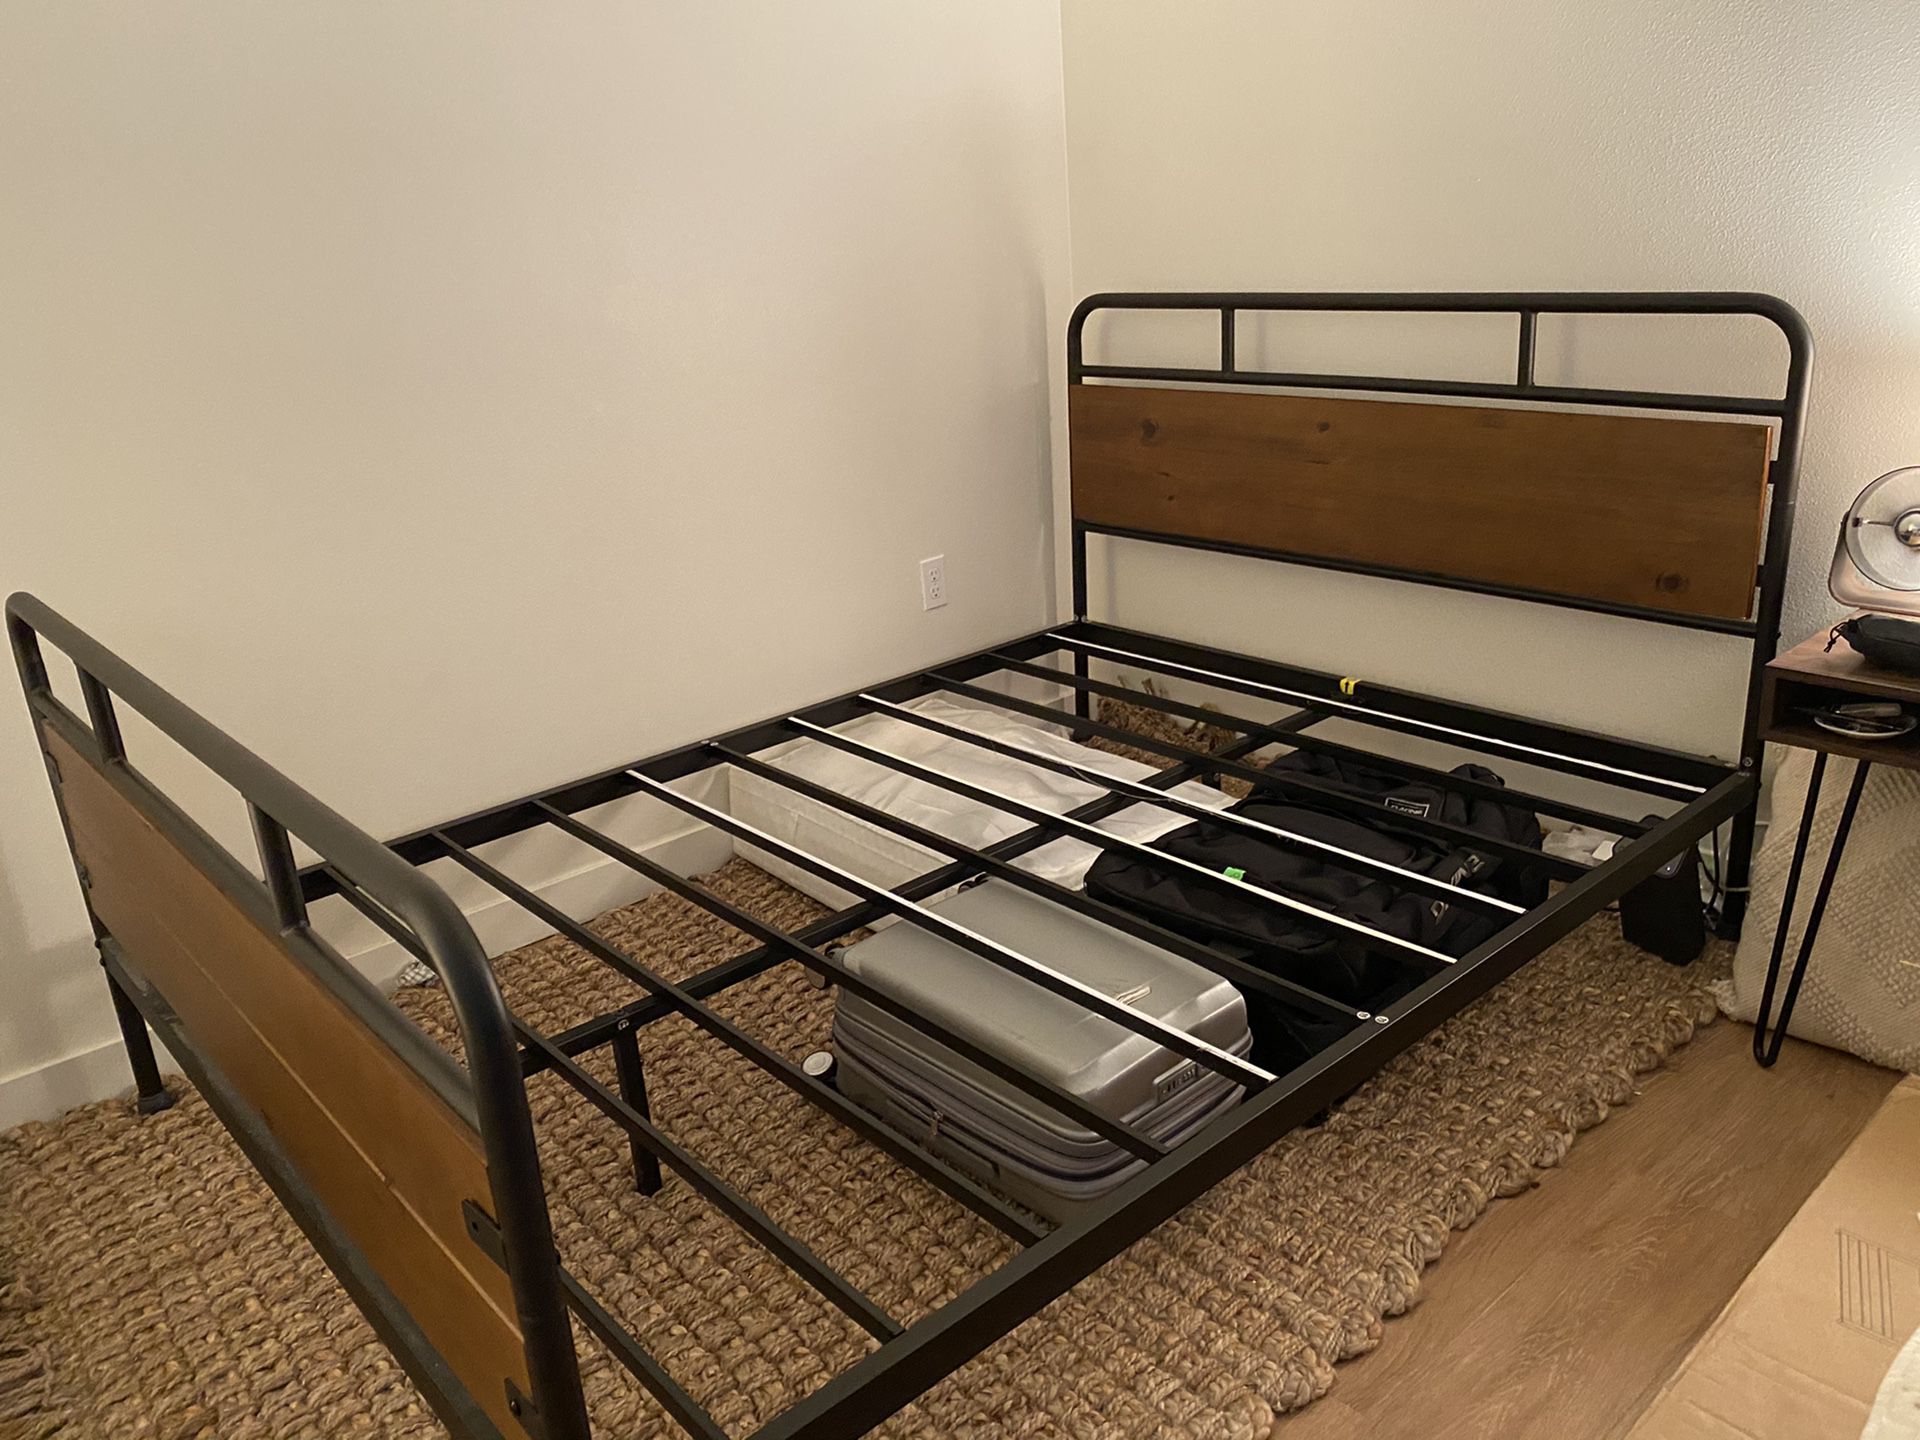 Queen bed frame with headboard and footboard